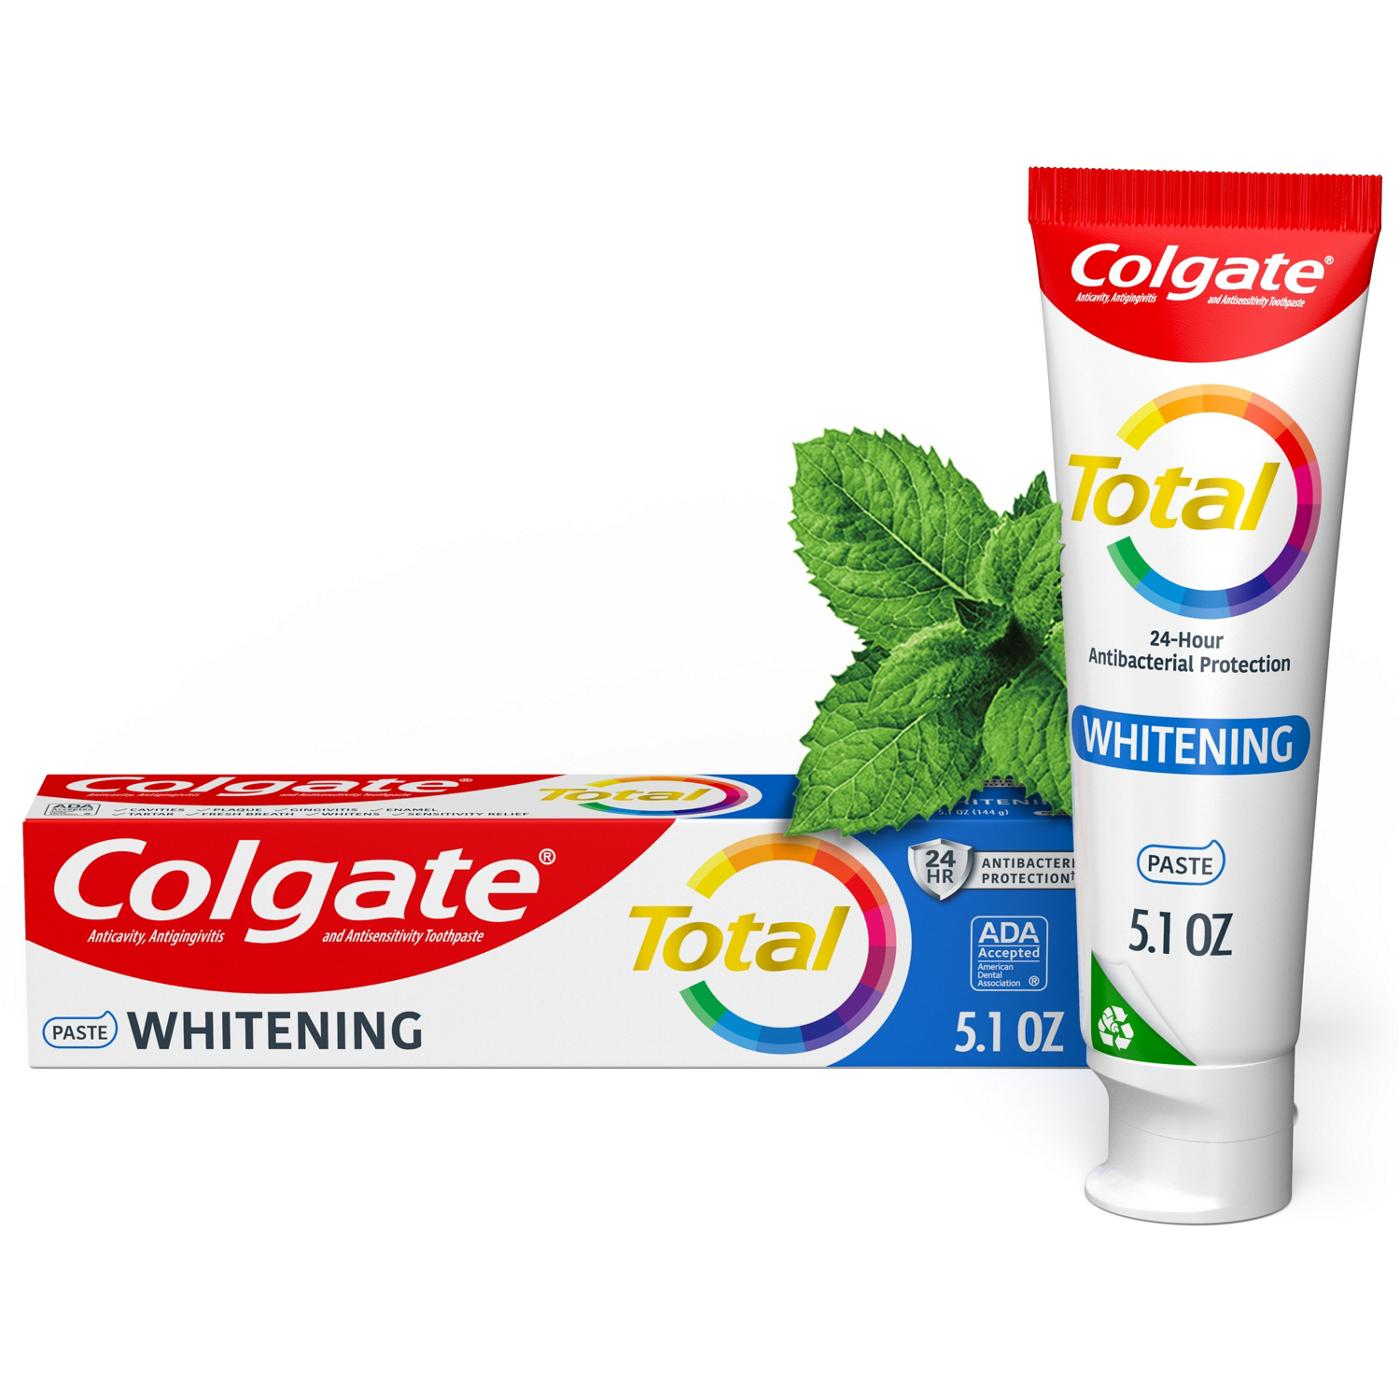 Colgate Total Whitening Toothpaste; image 4 of 5